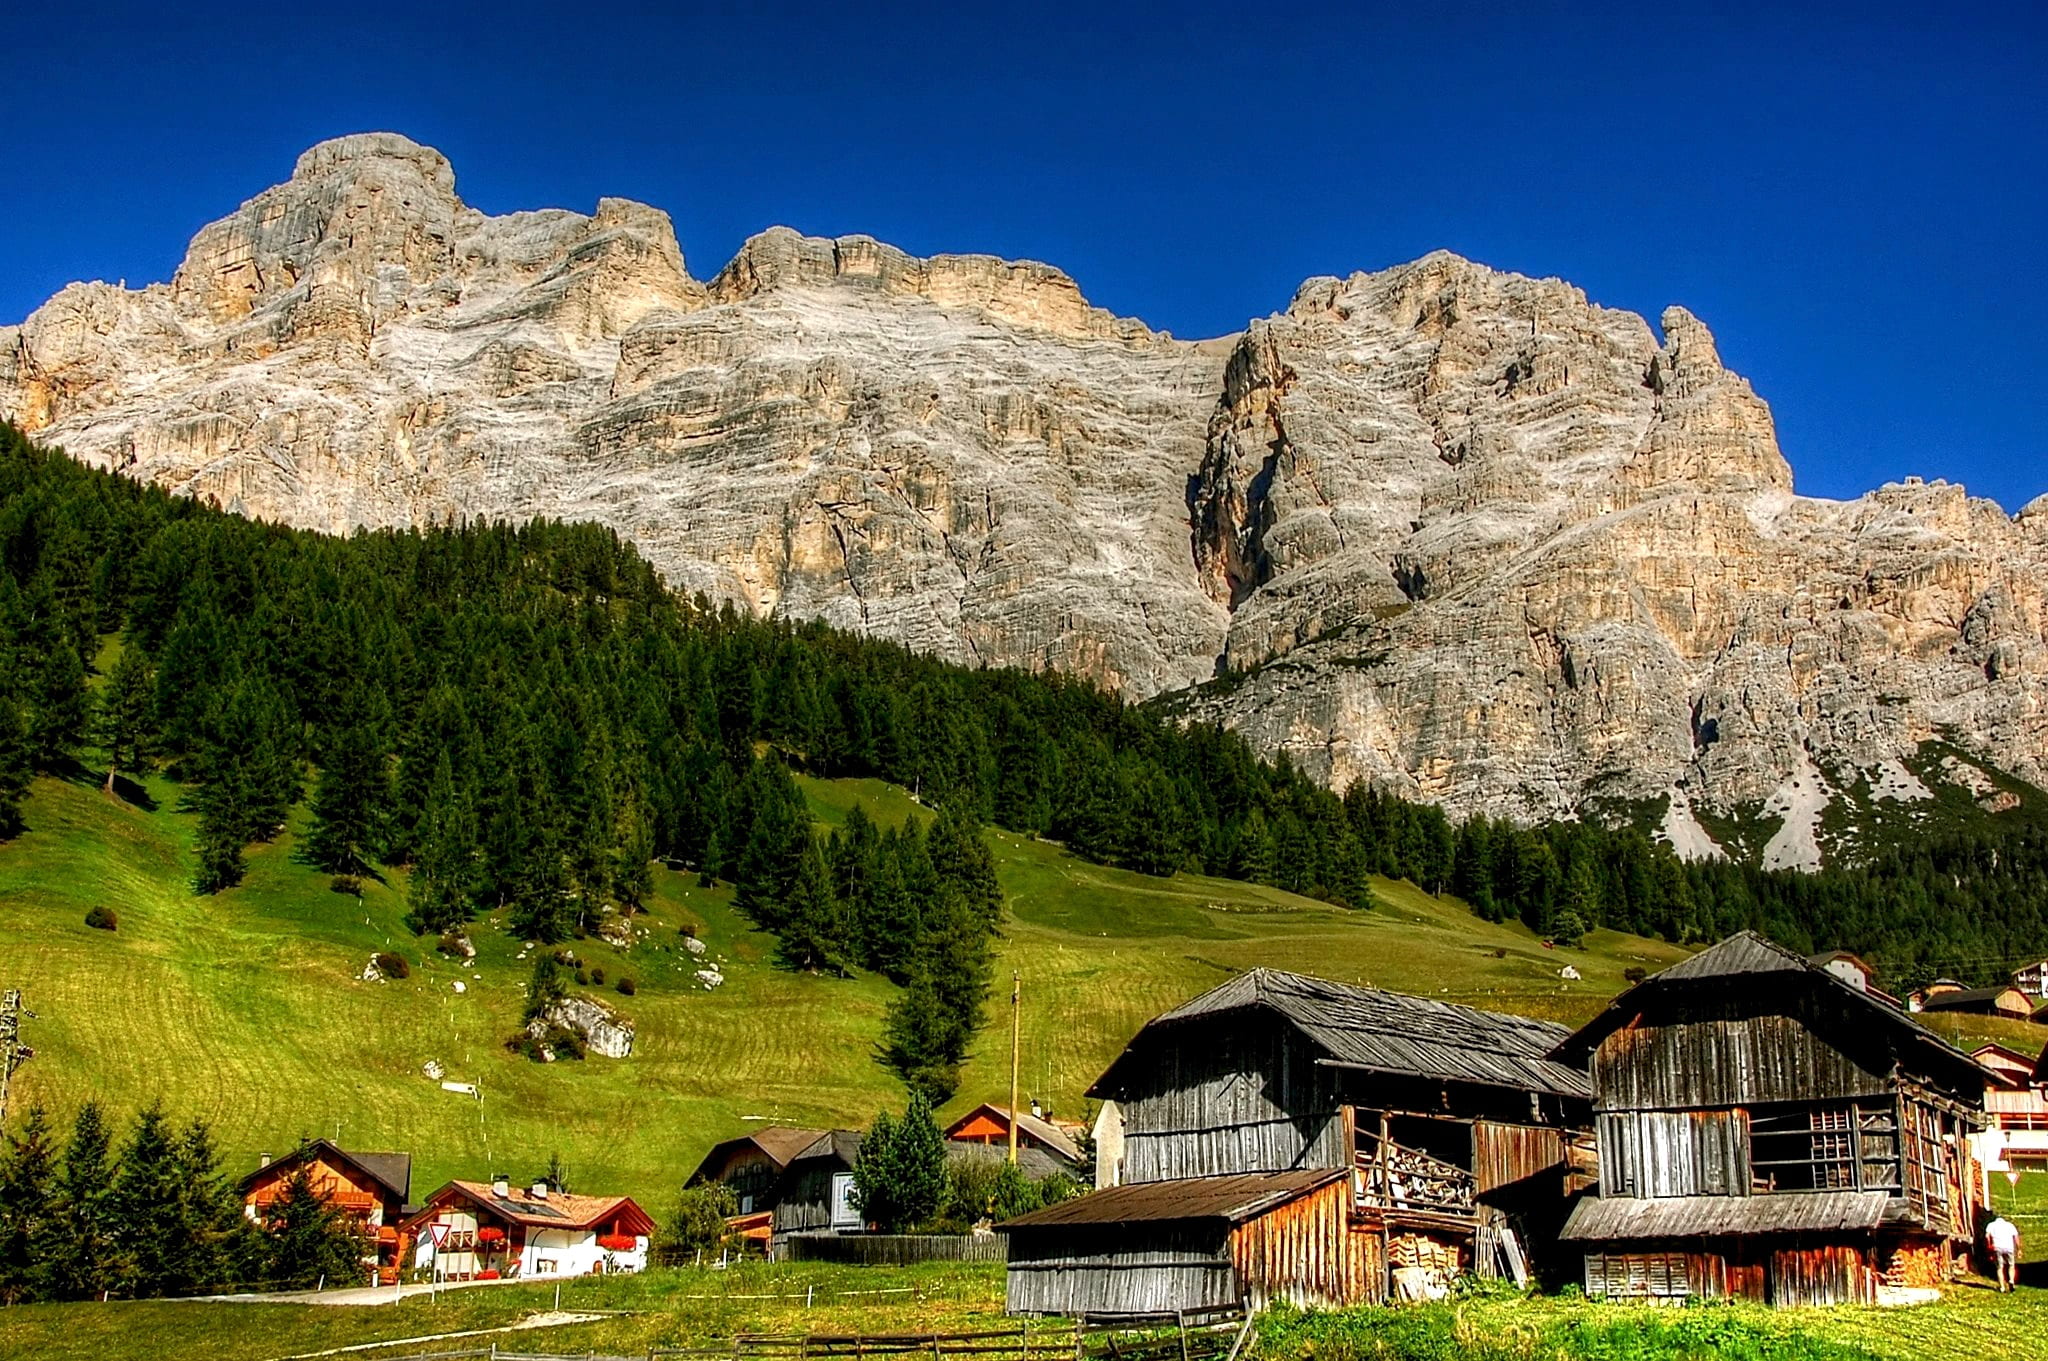 dolomites, mountains, italy, south tyrol, alpine, view, nature